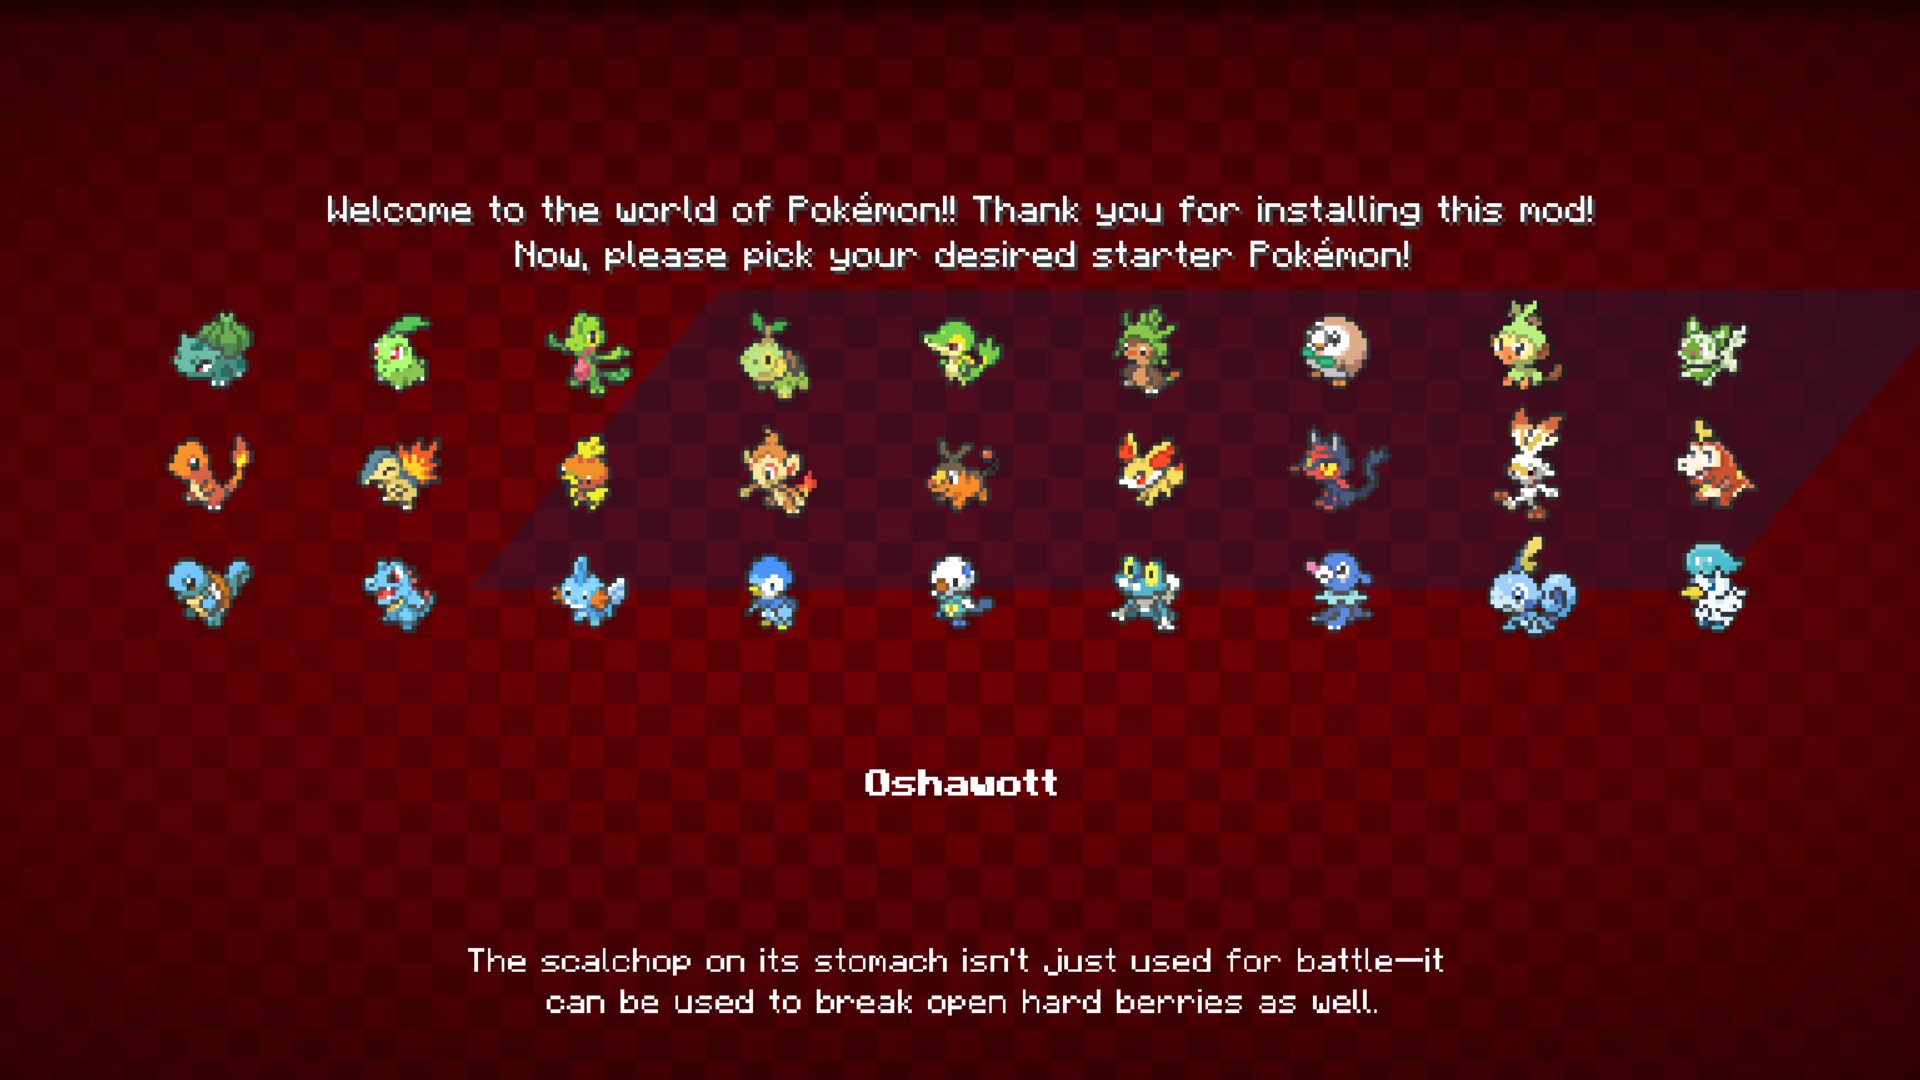 Pixelmon Is A Perfect Way To Play Catch Your Favorite Pokemon